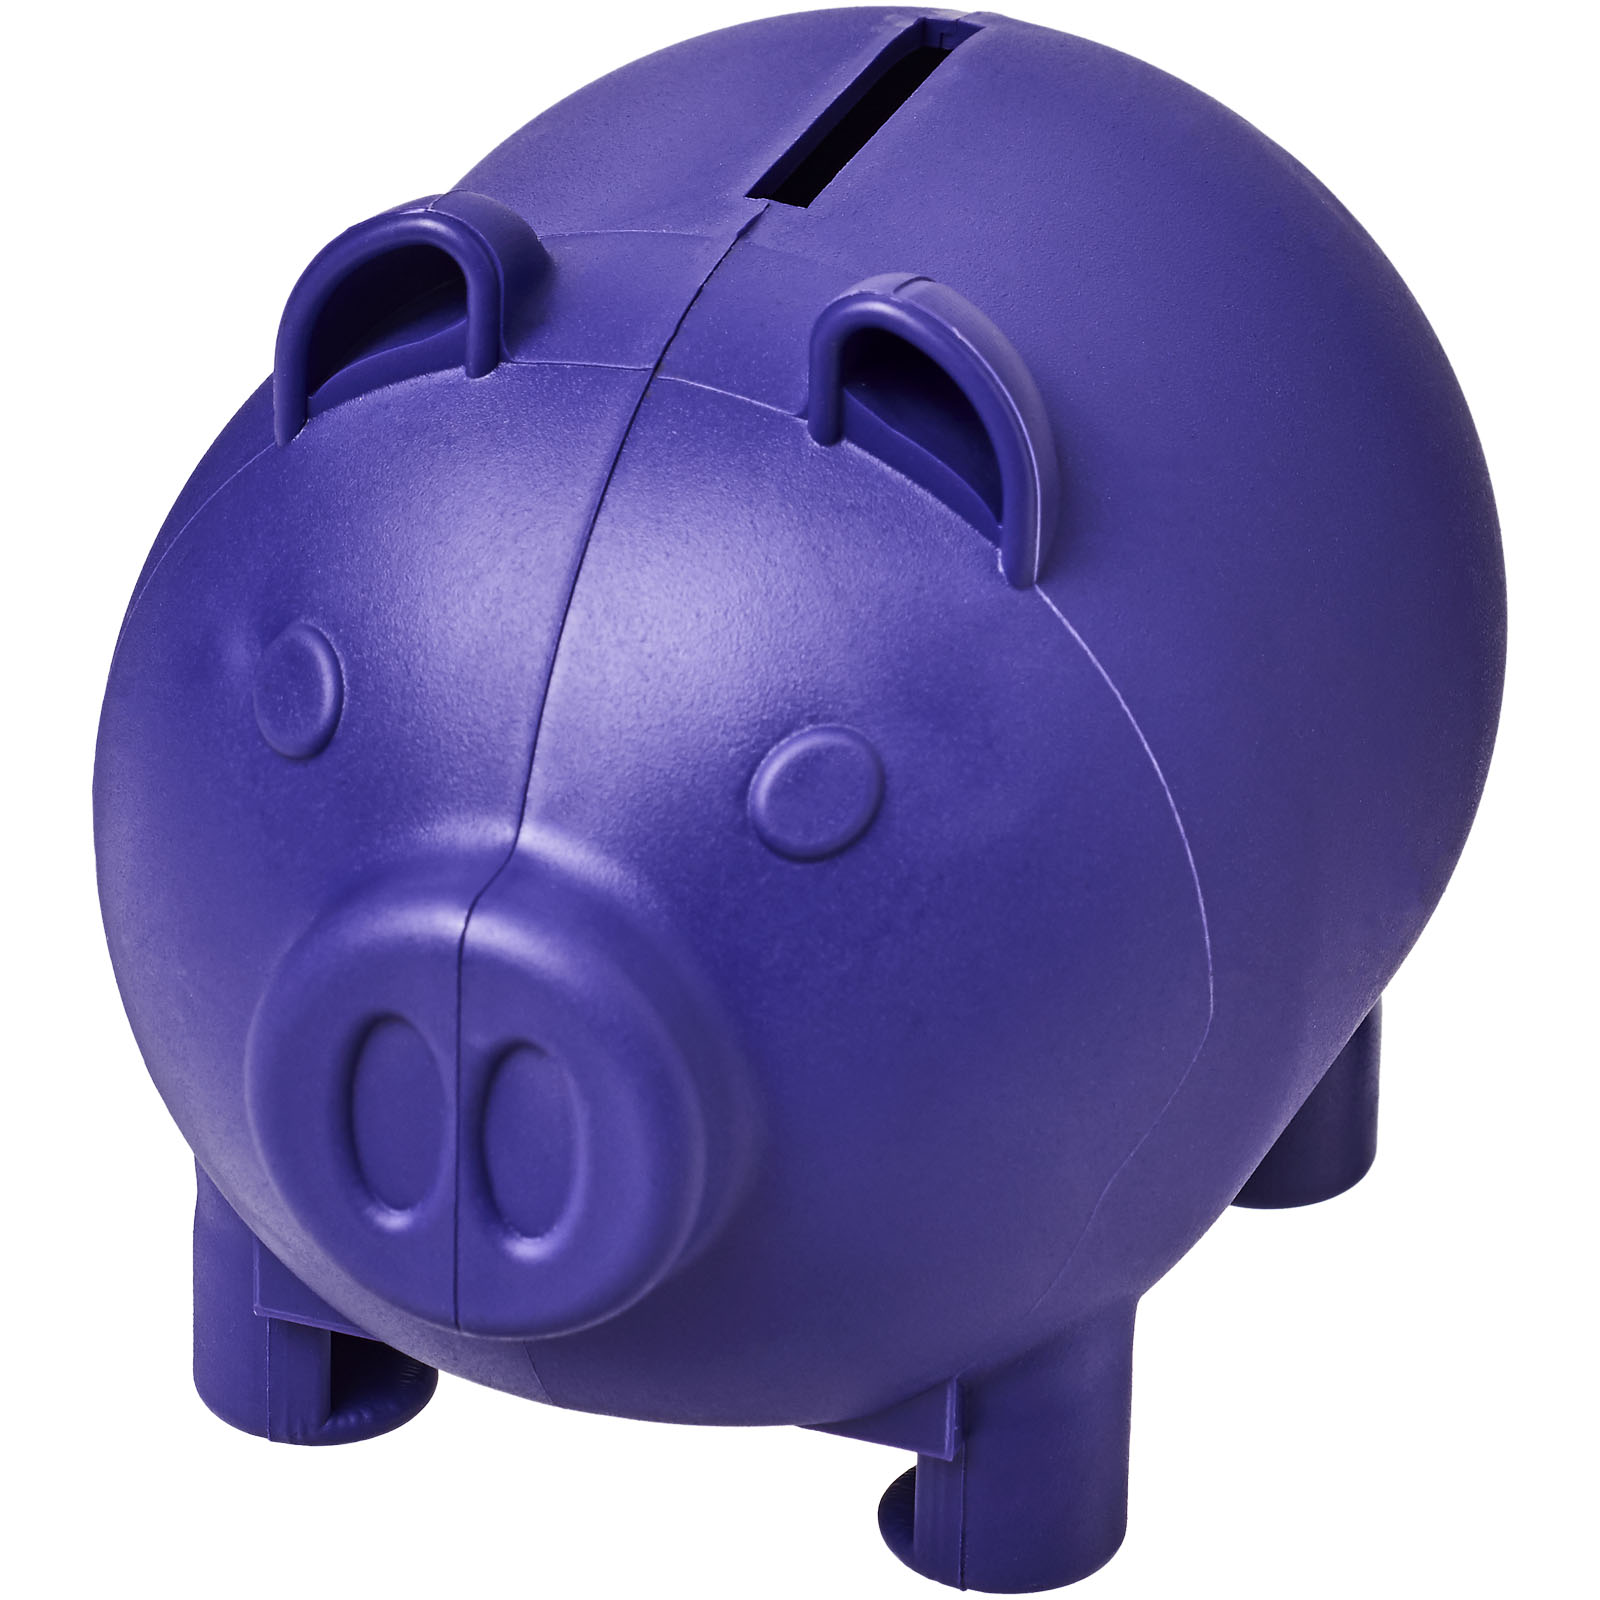 Advertising Home Accessories - Oink small piggy bank